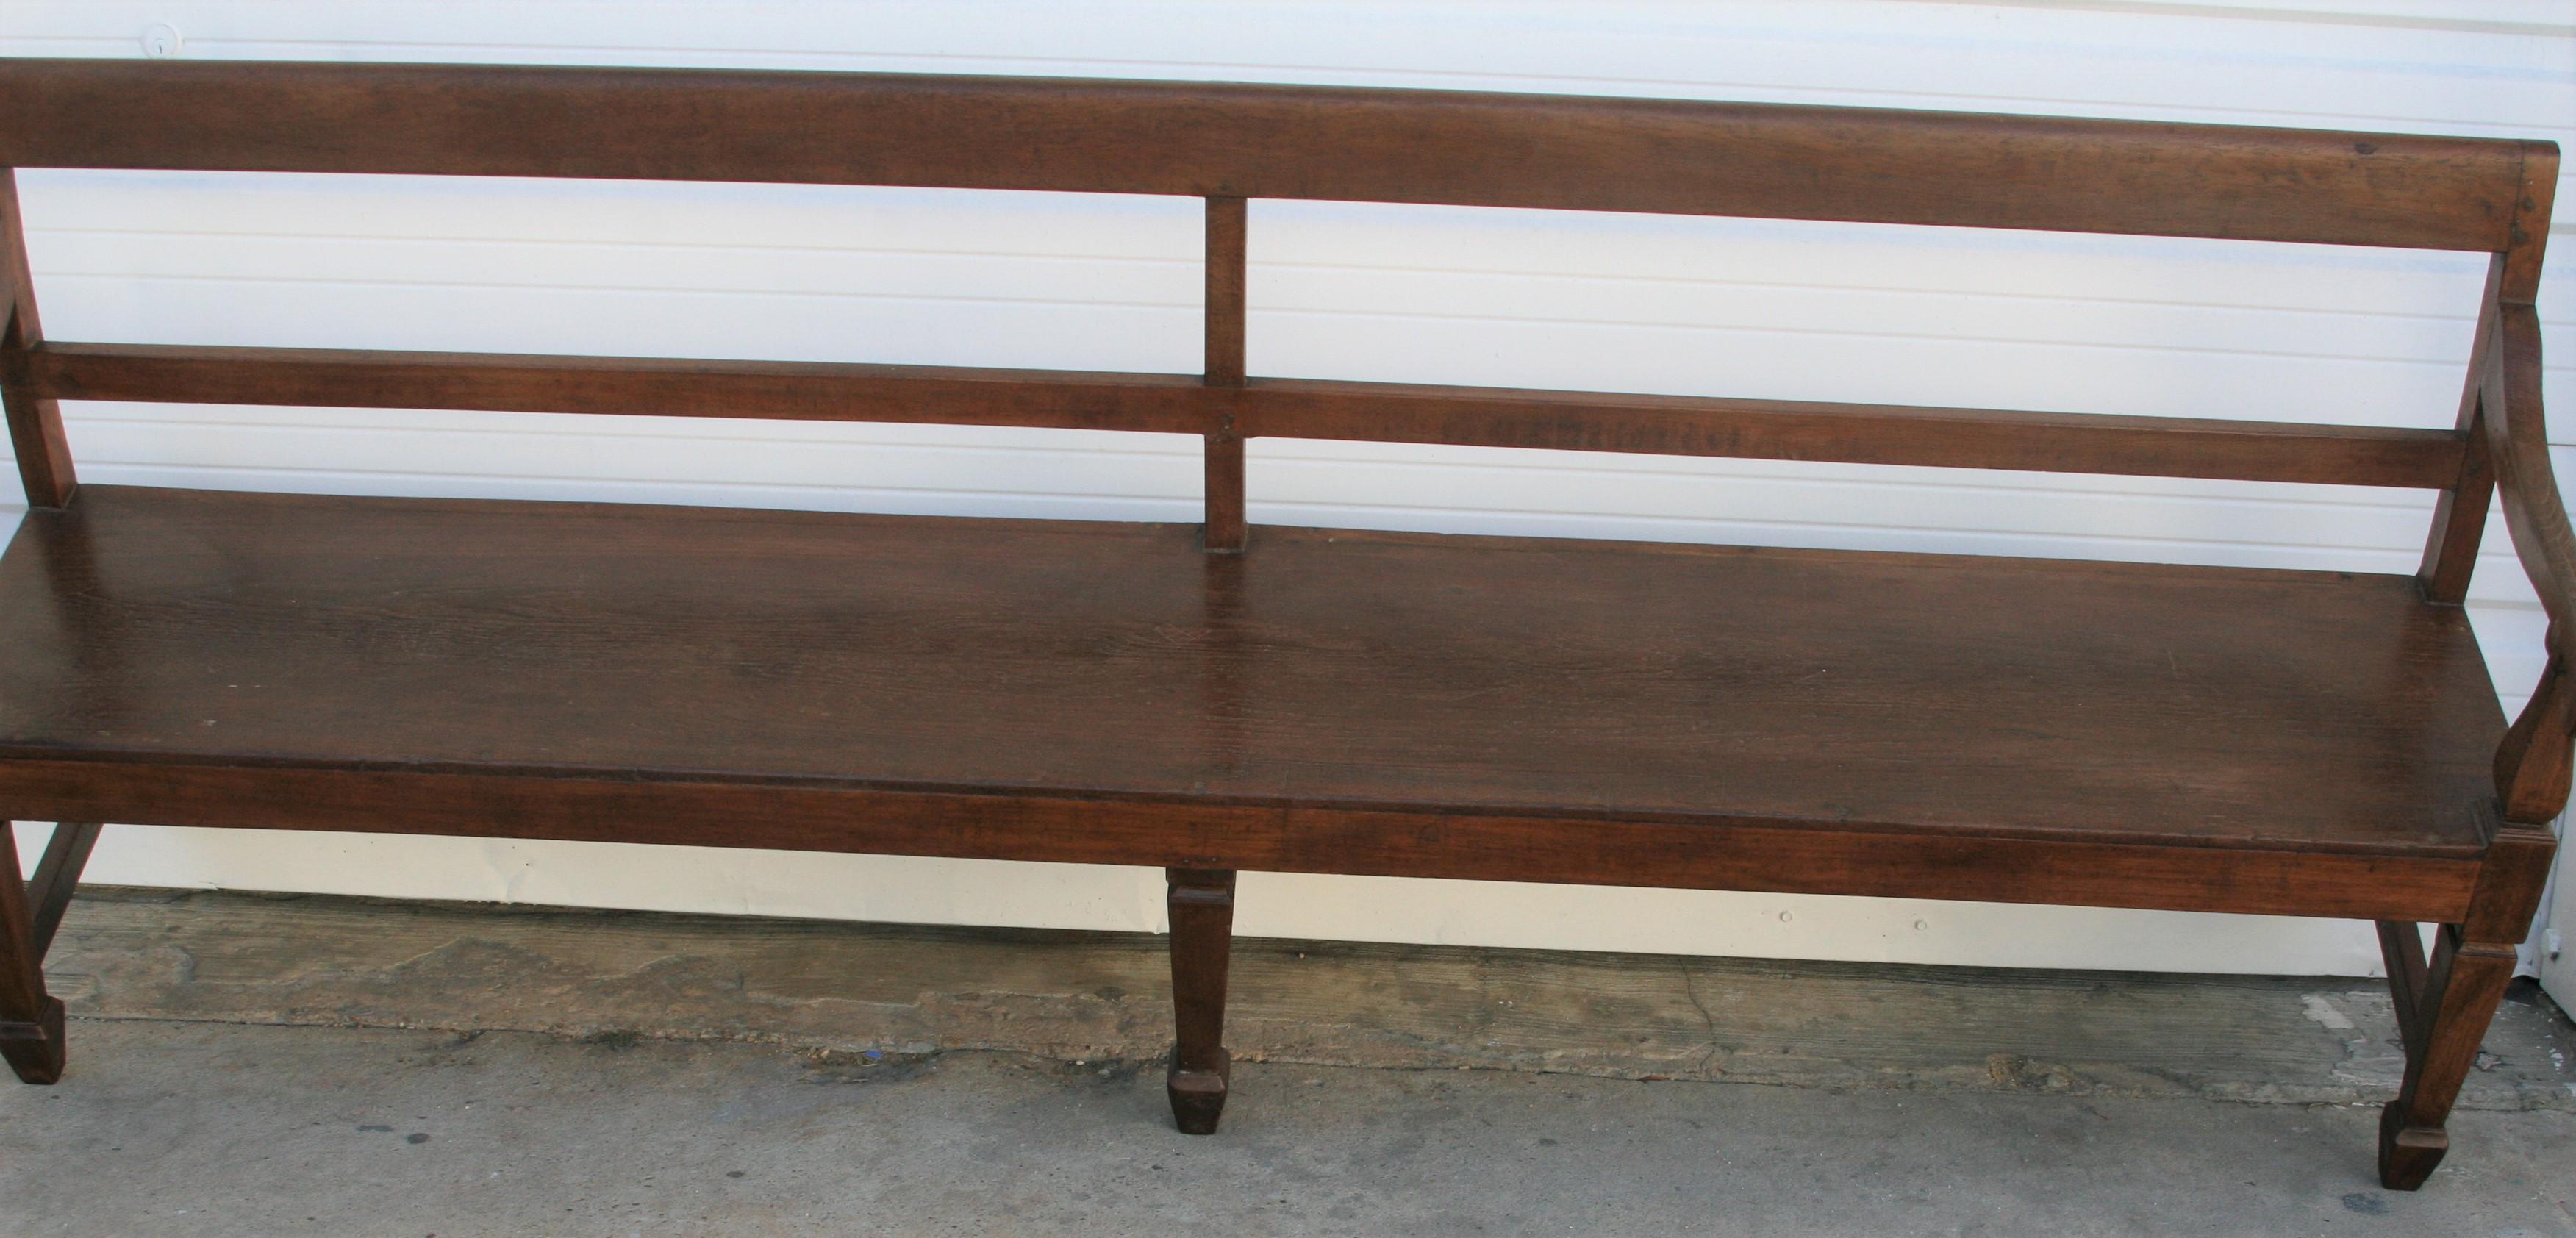 Rare 1910s Solid Teak Wood Handcrafted Bench from a Company Office 1